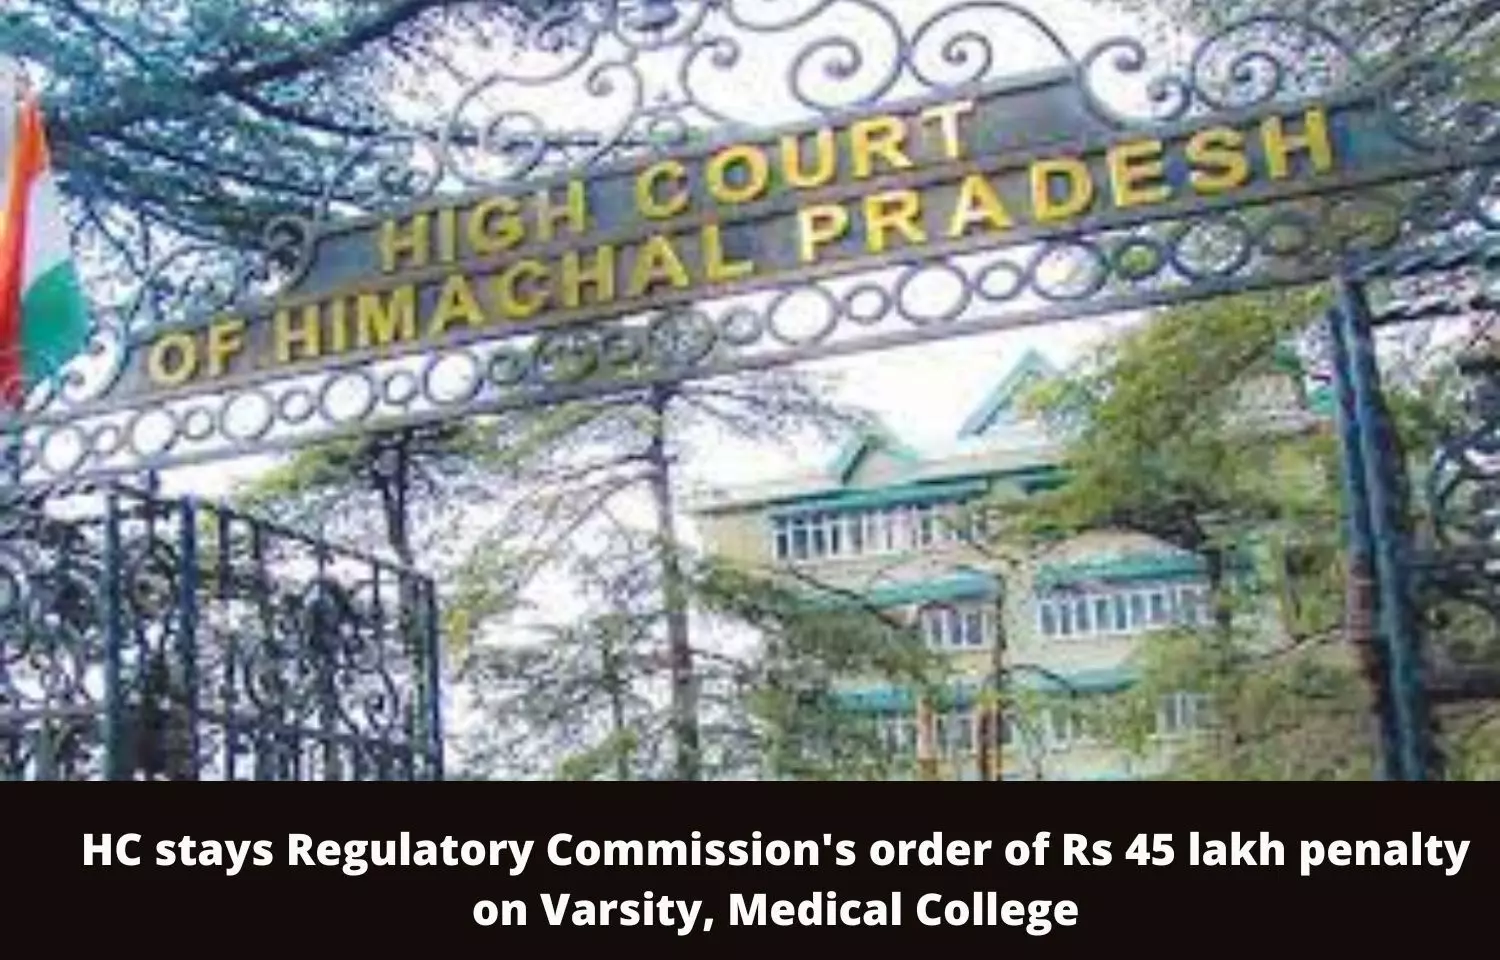 HC stays Regulatory Commissions order of Rs 45 lakh penalty on Varsity, Medical College